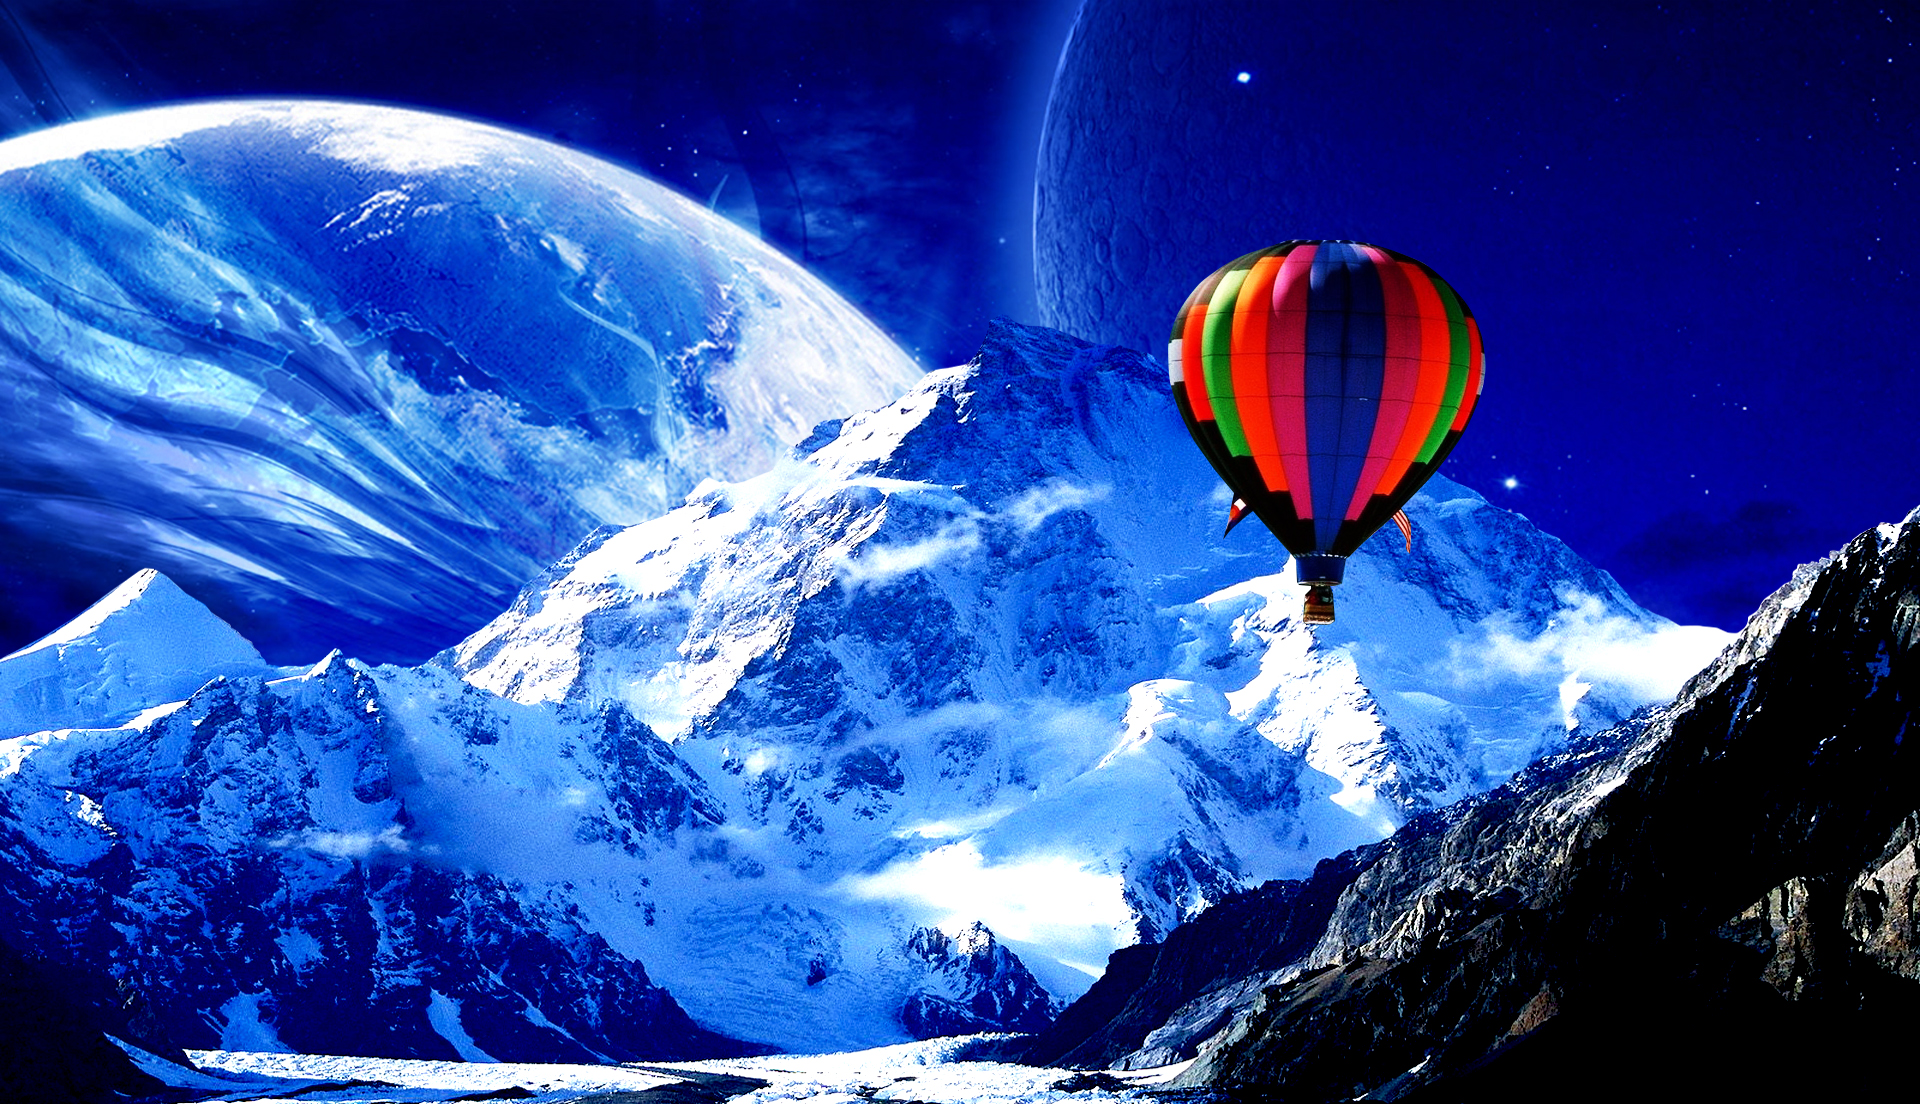 Download mobile wallpaper Landscape, Winter, Moon, Snow, Mountain, 3D, Balloon, Photography, Psychedelic, Scenic, Cgi, Manipulation, Trippy, Hot Air Balloon for free.